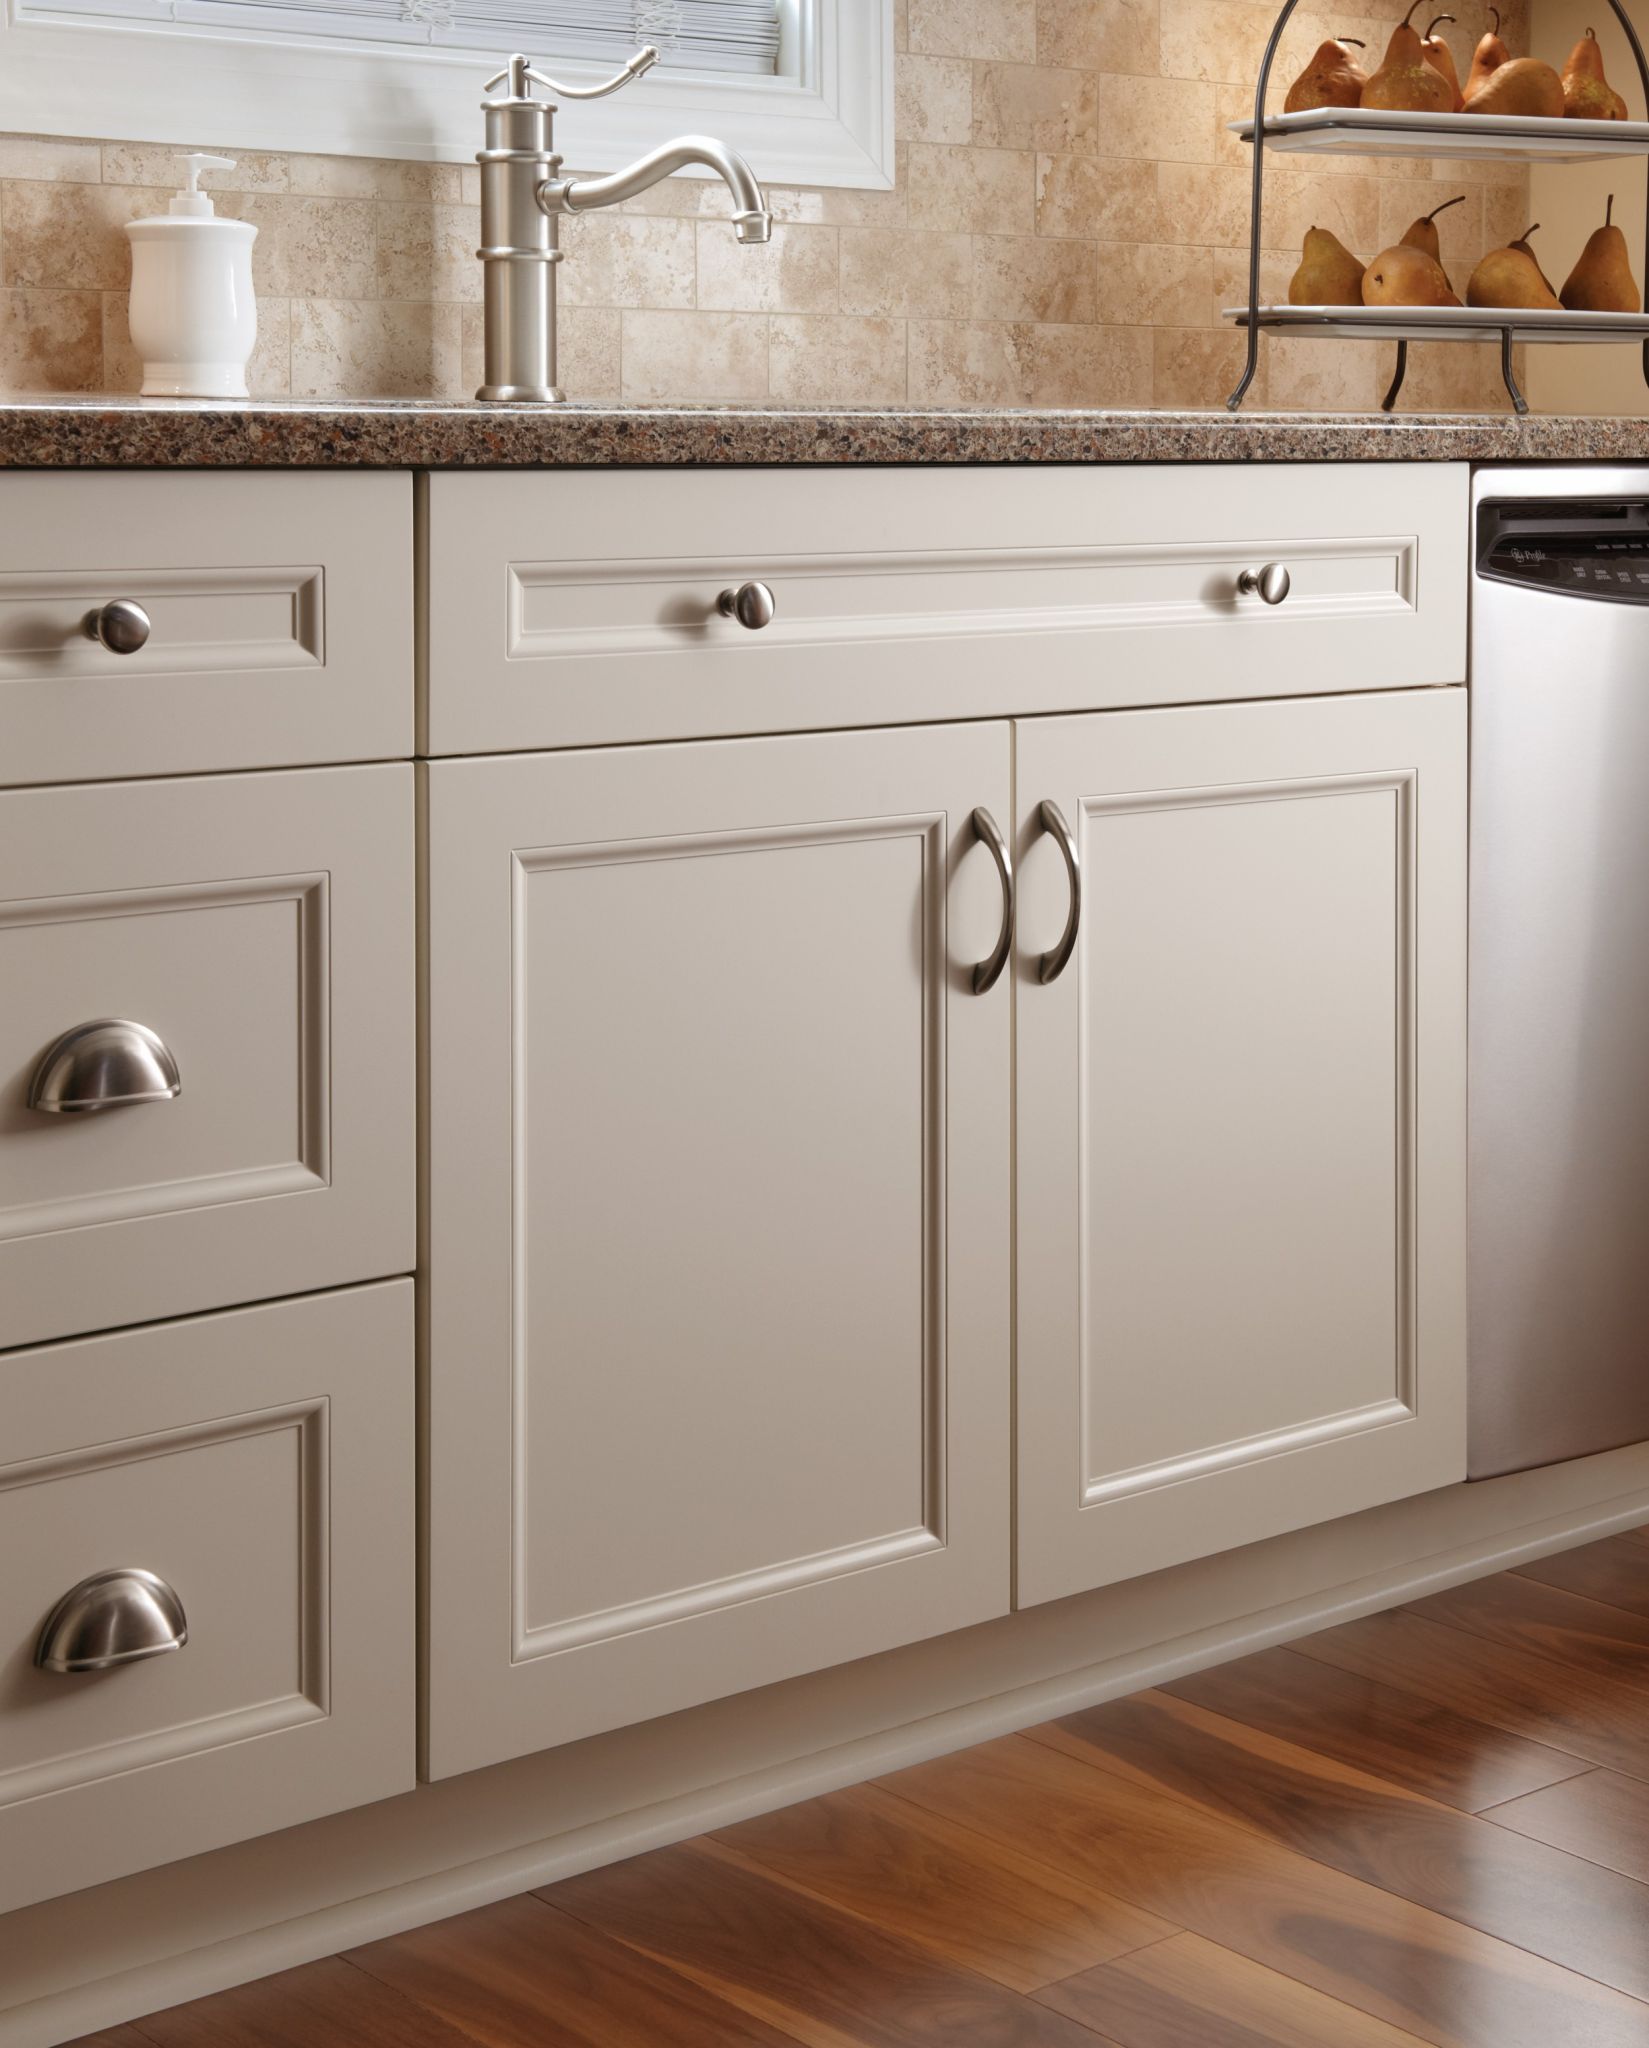 Where To Place Cabinet Pulls On Drawers www cintronbeveragegroup com